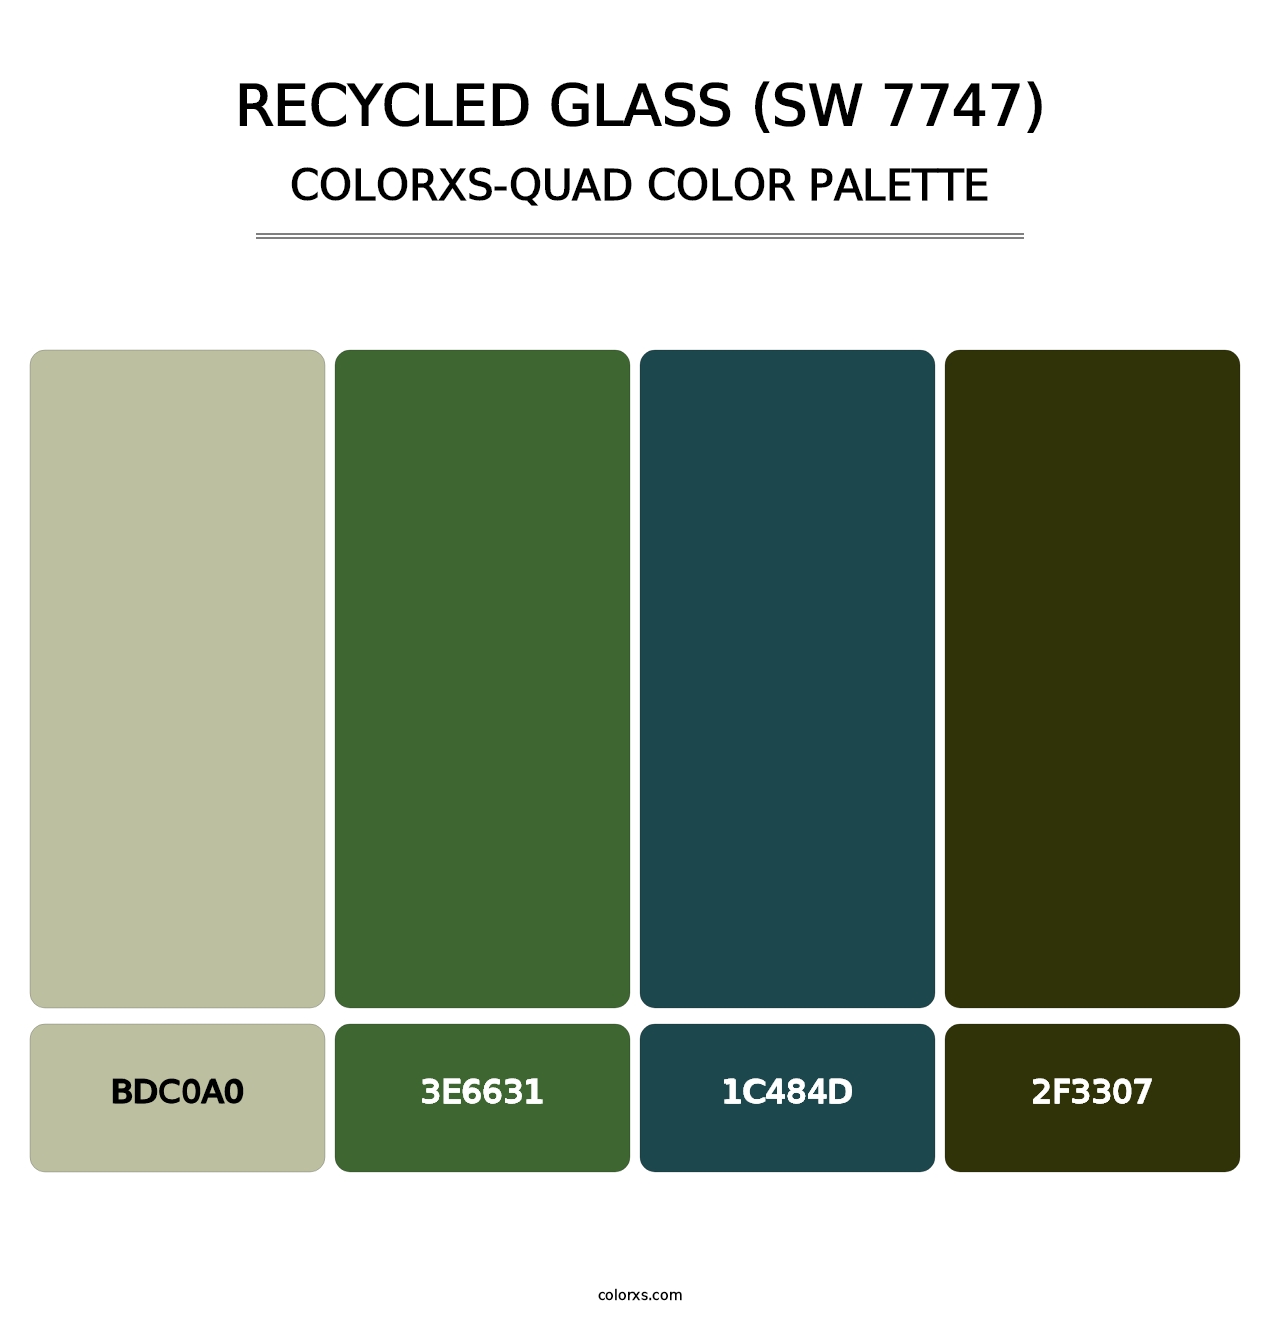 Recycled Glass (SW 7747) - Colorxs Quad Palette